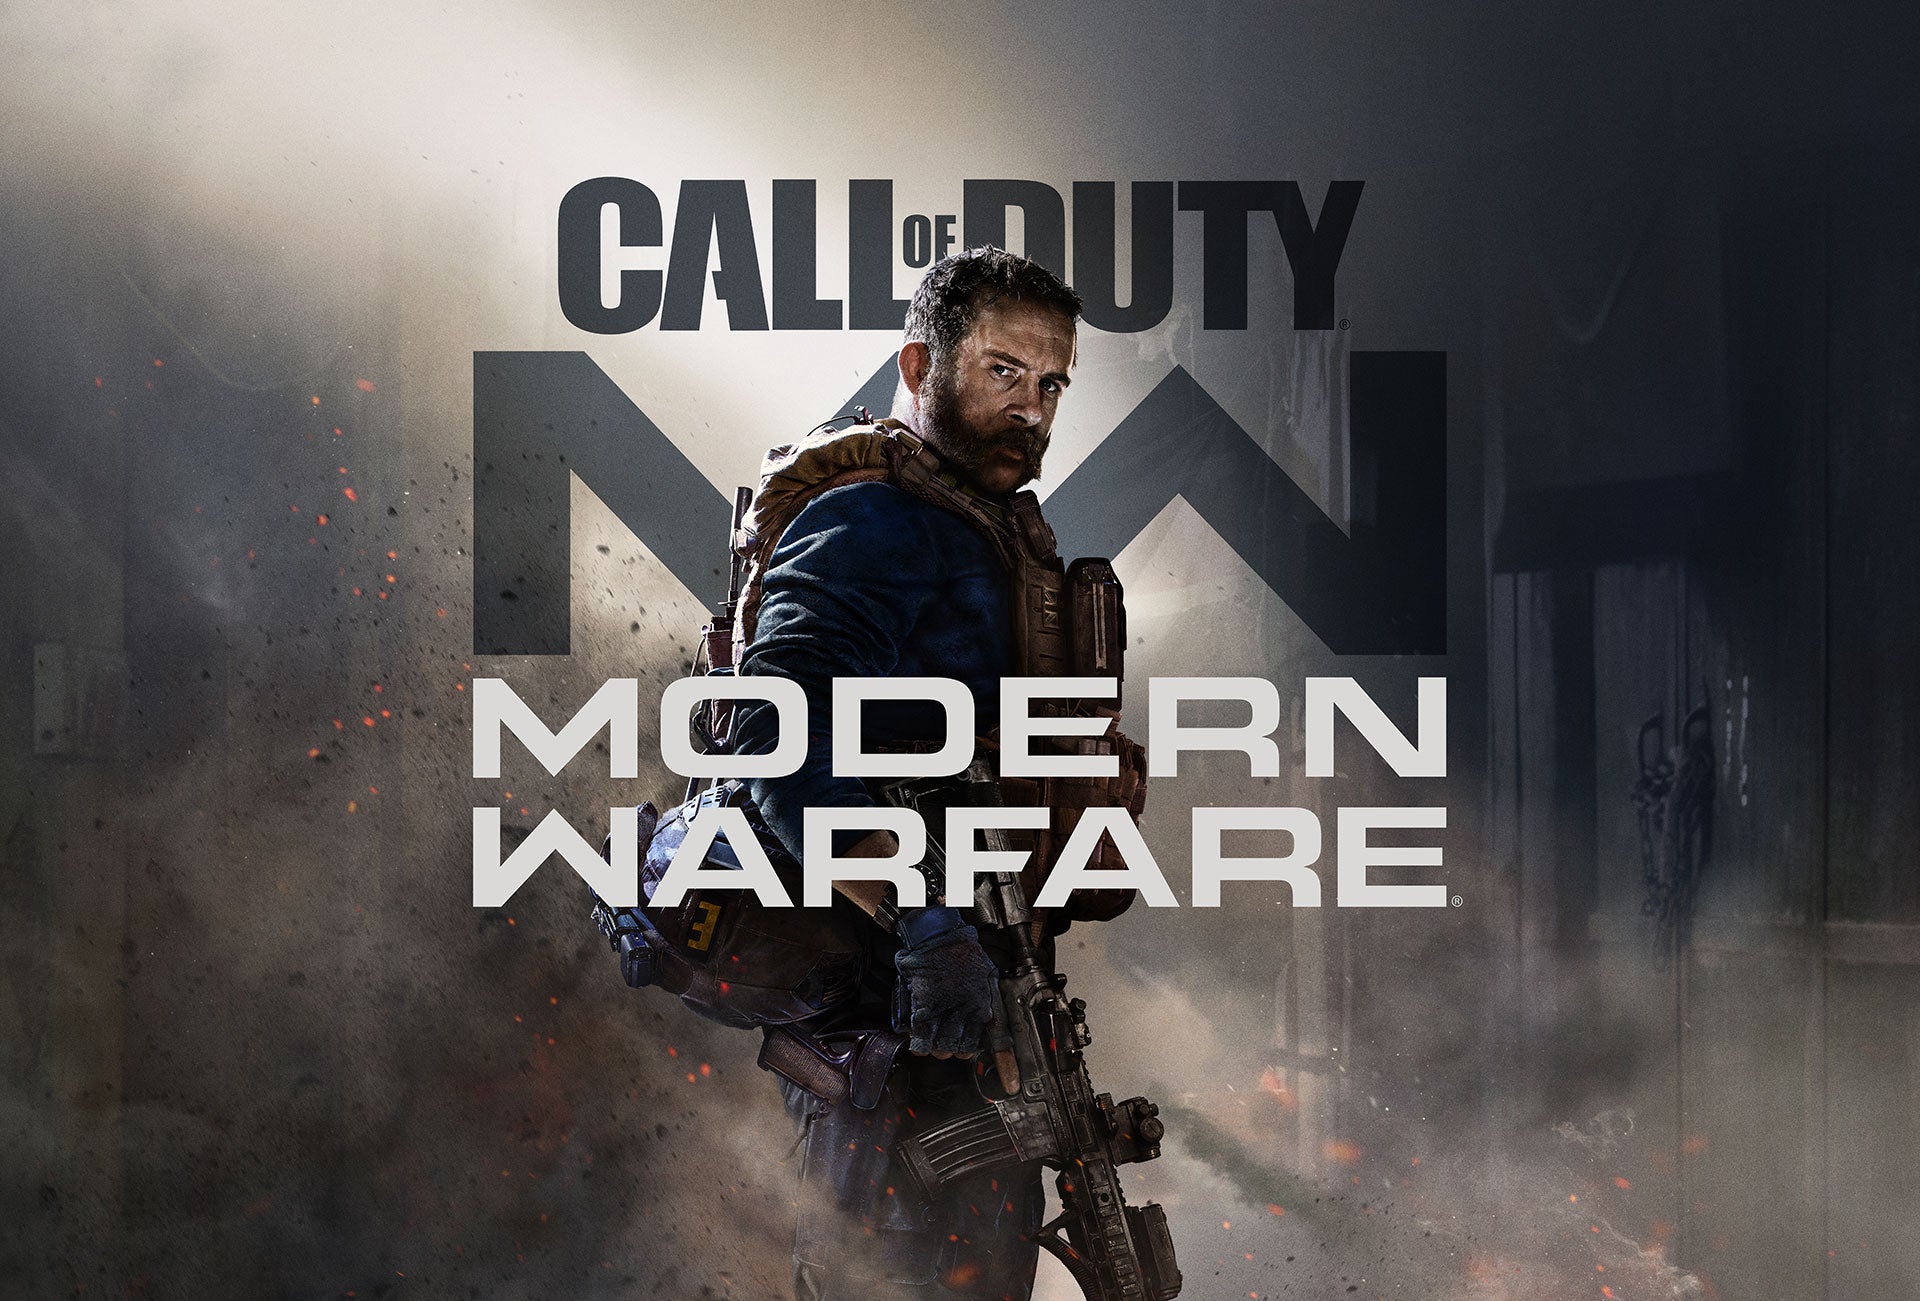 Image for Call of Duty: Modern Warfare smashes franchise sales record